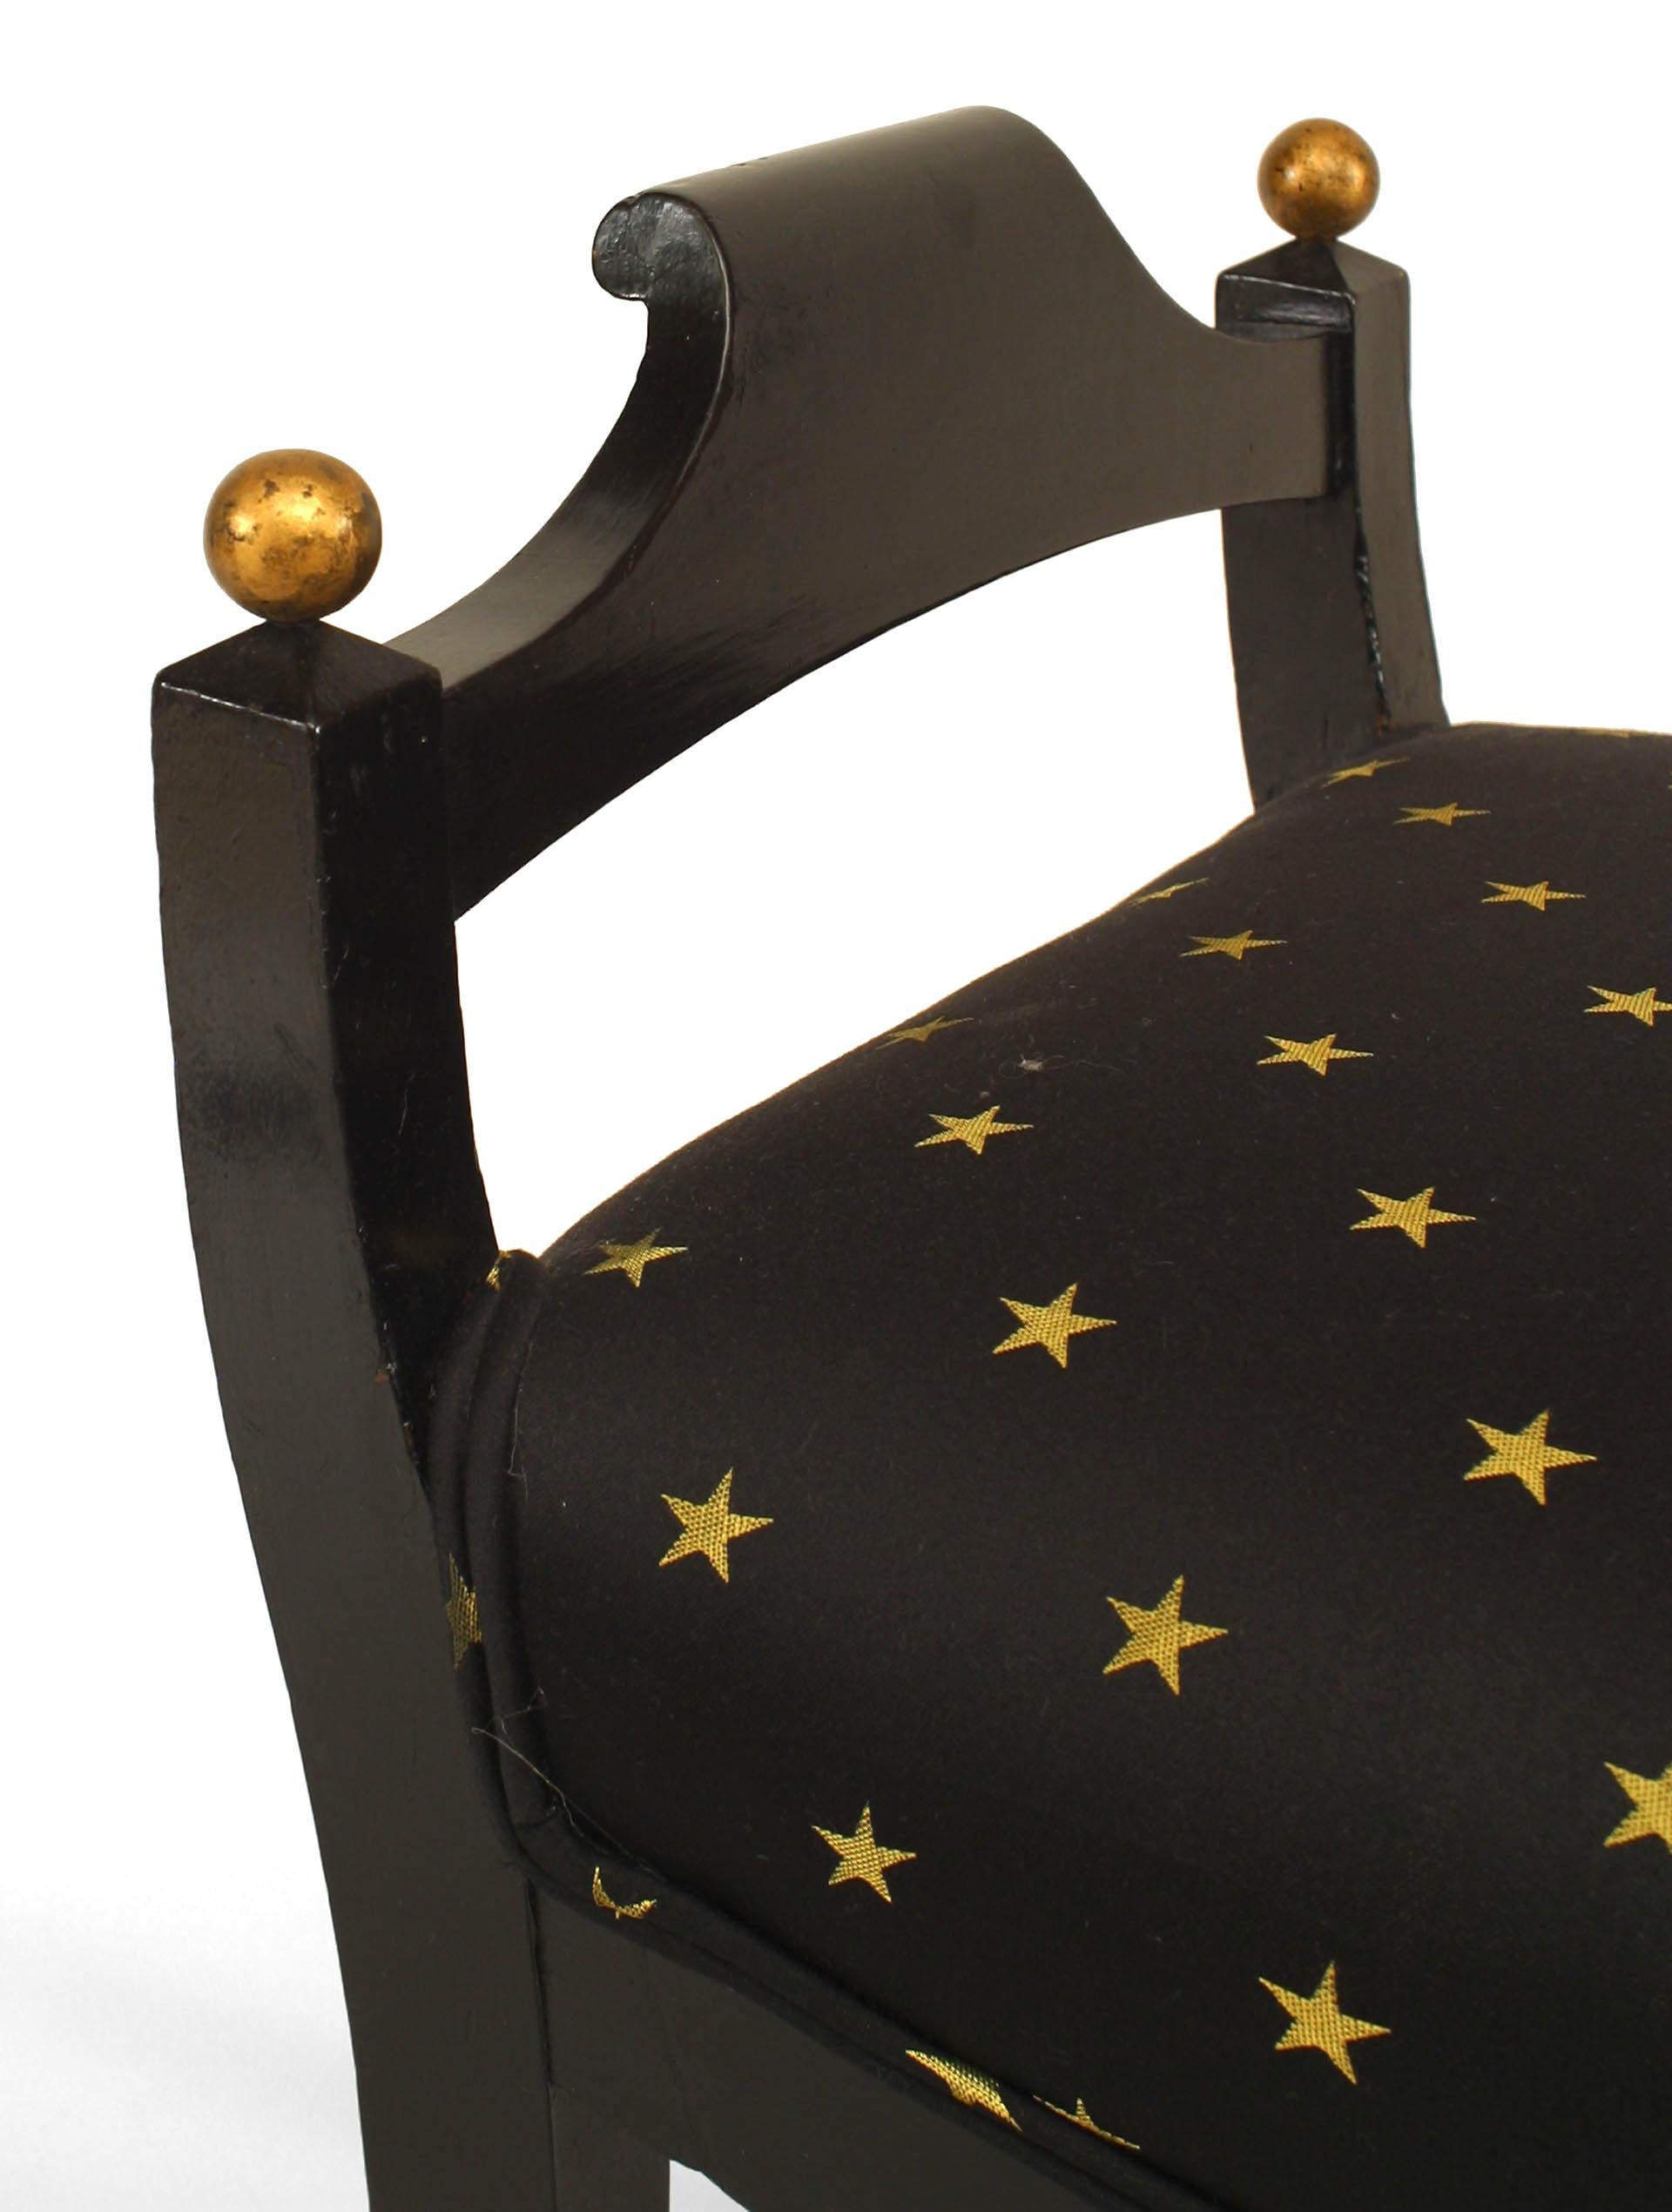 Swedish Biedermeier style (20th Century) black lacquered bench with side arms and black upholstered seat with gold star design.
